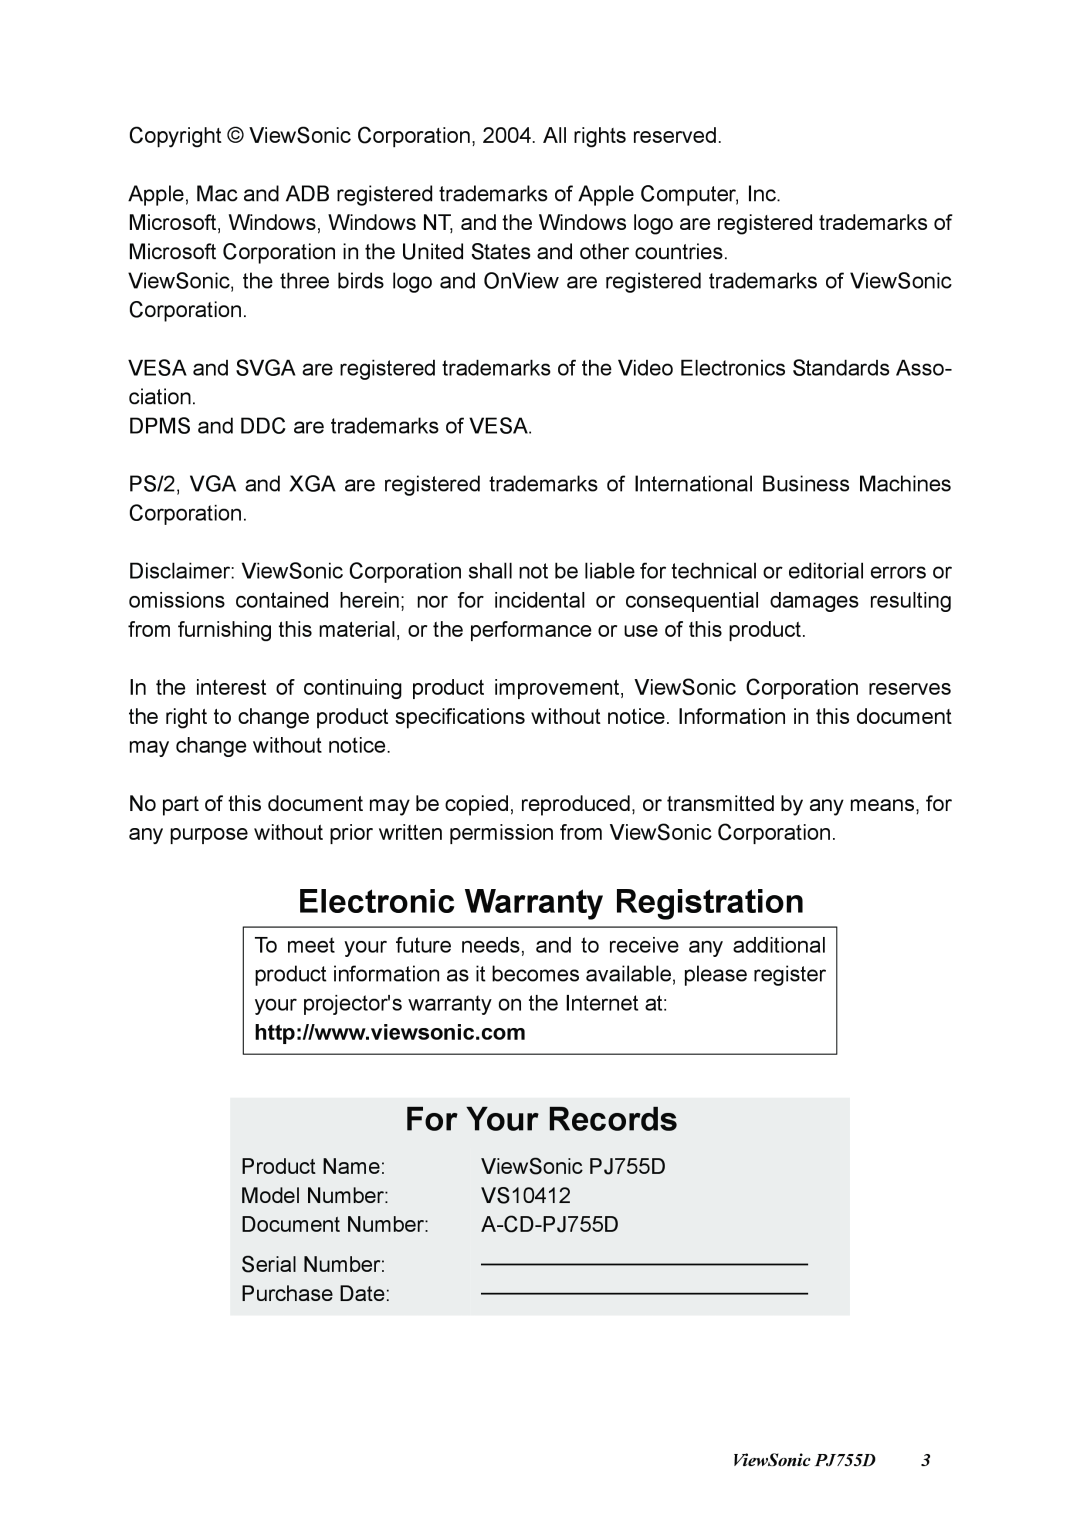 ViewSonic PJ755D manual Electronic Warranty Registration, For Your Records 